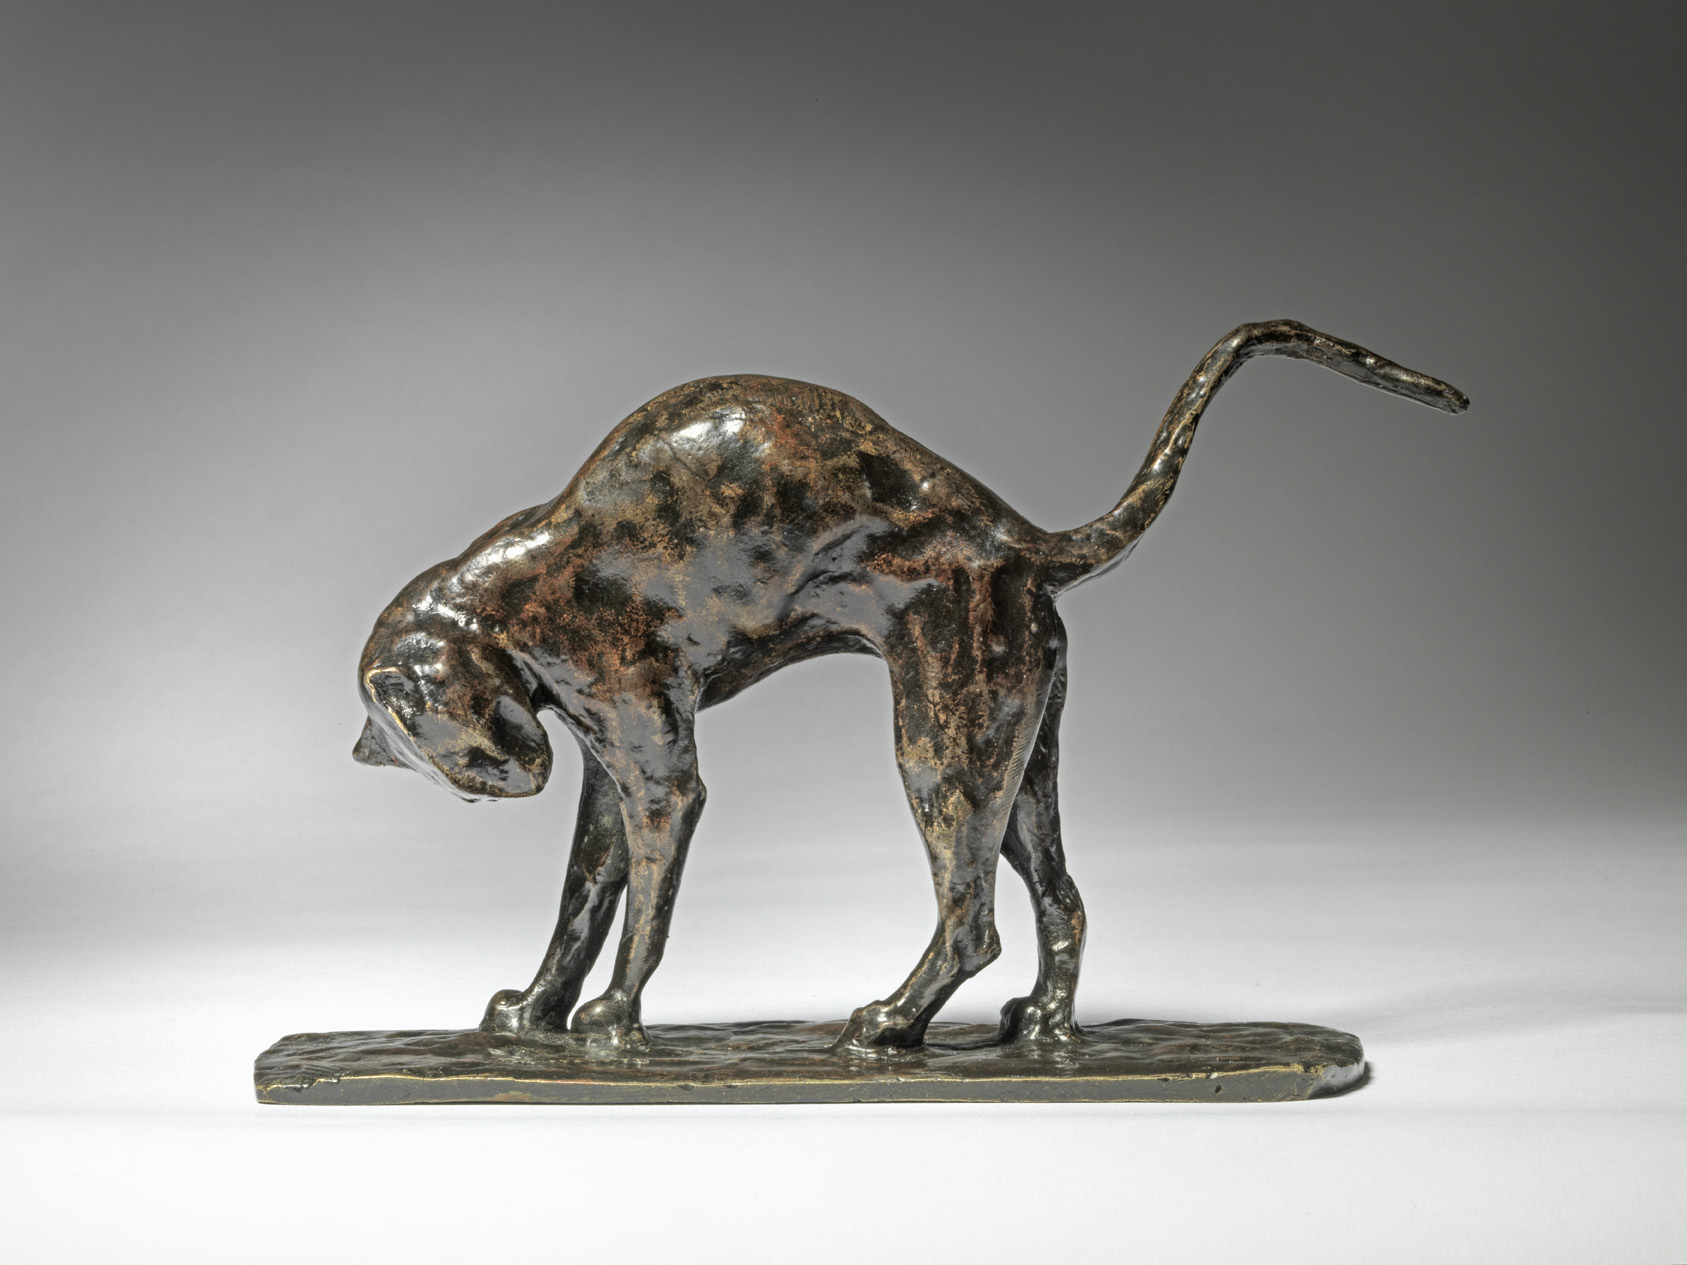 Cat with Arched Back, c. 1910